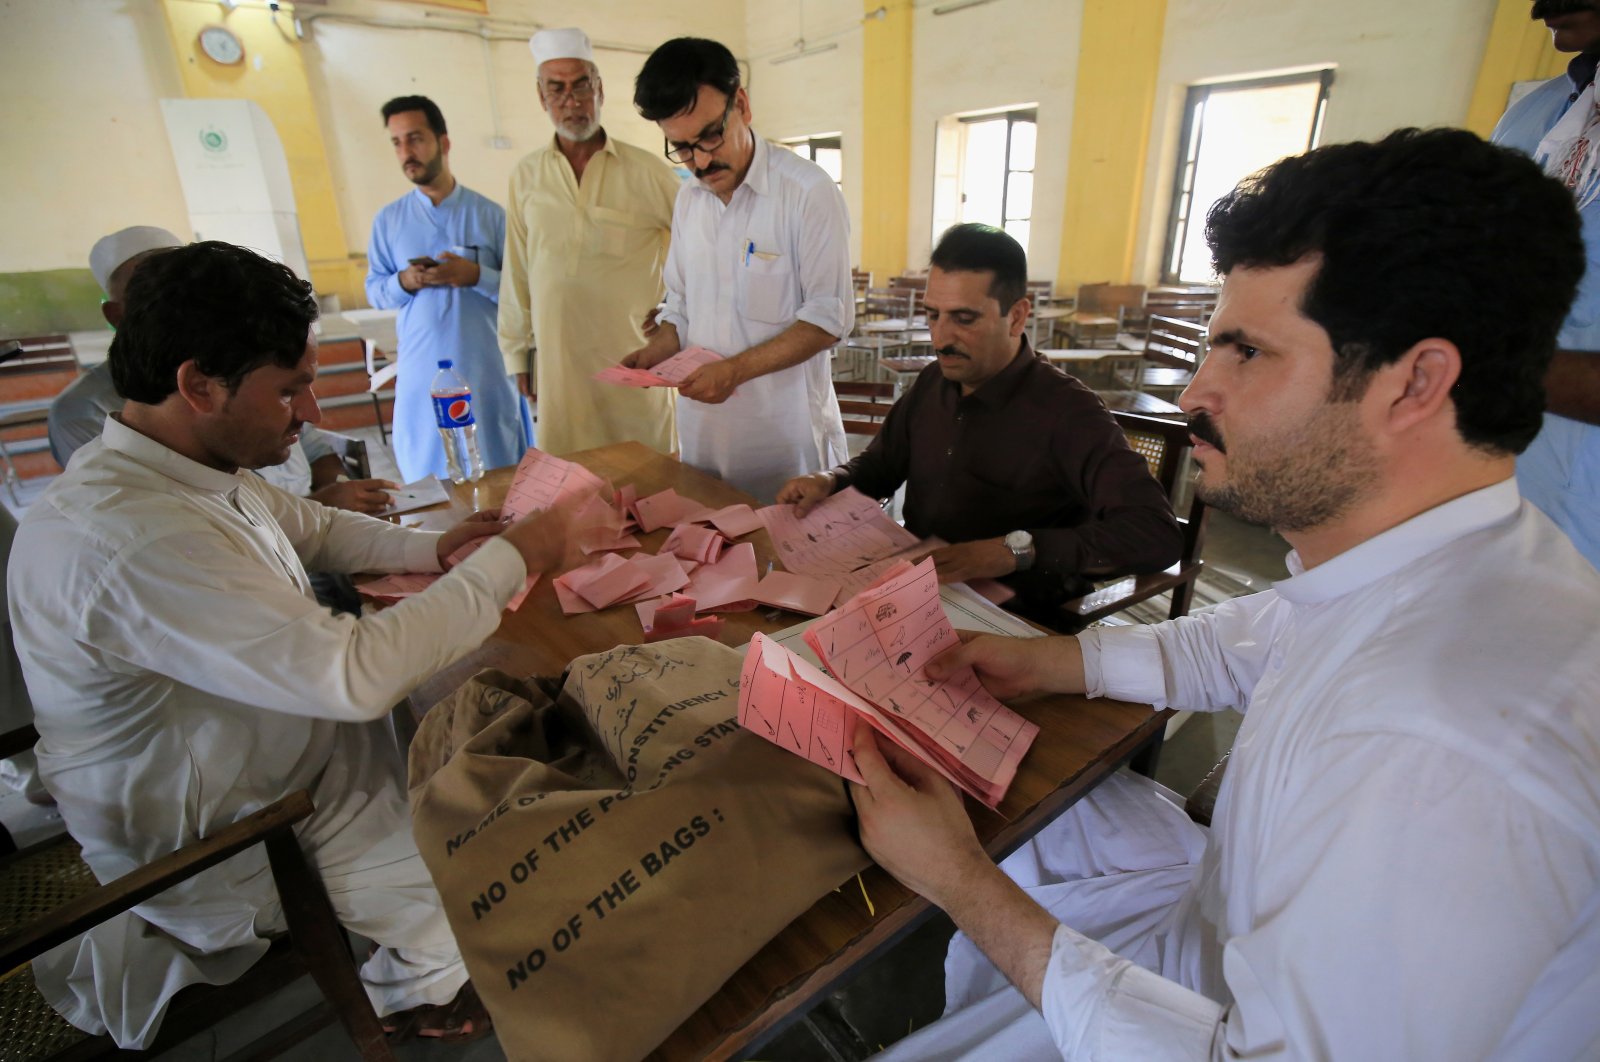 Polling officers count ballots at a polling station in Peshawar, Pakistan, July 25, 2021. (EPA Photo)